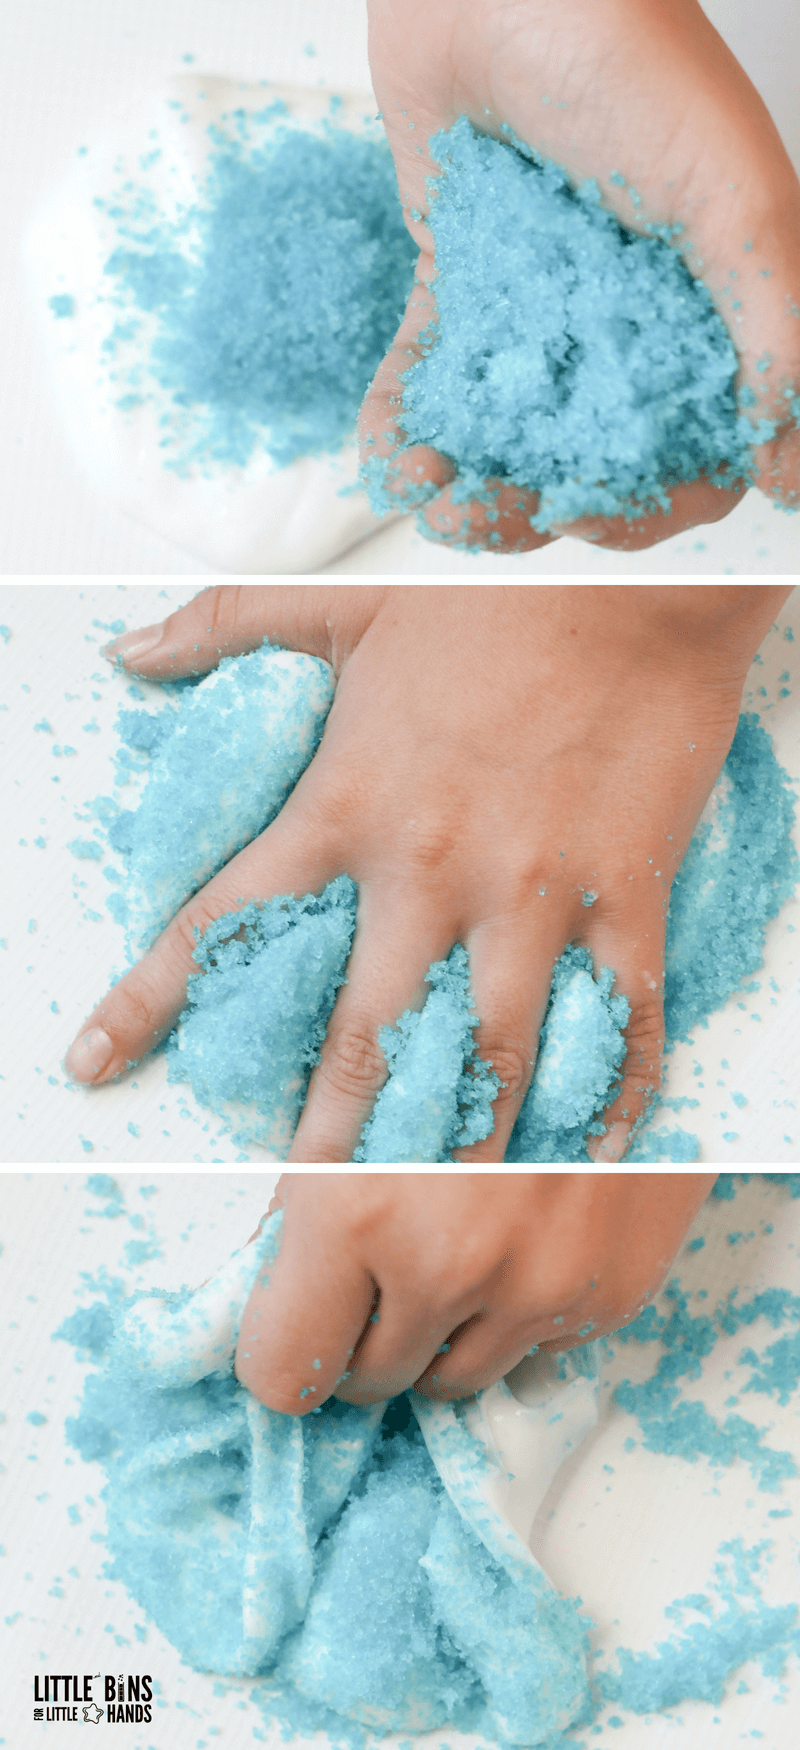 mixing blue instant snow into base slime recipe to create cloud slime